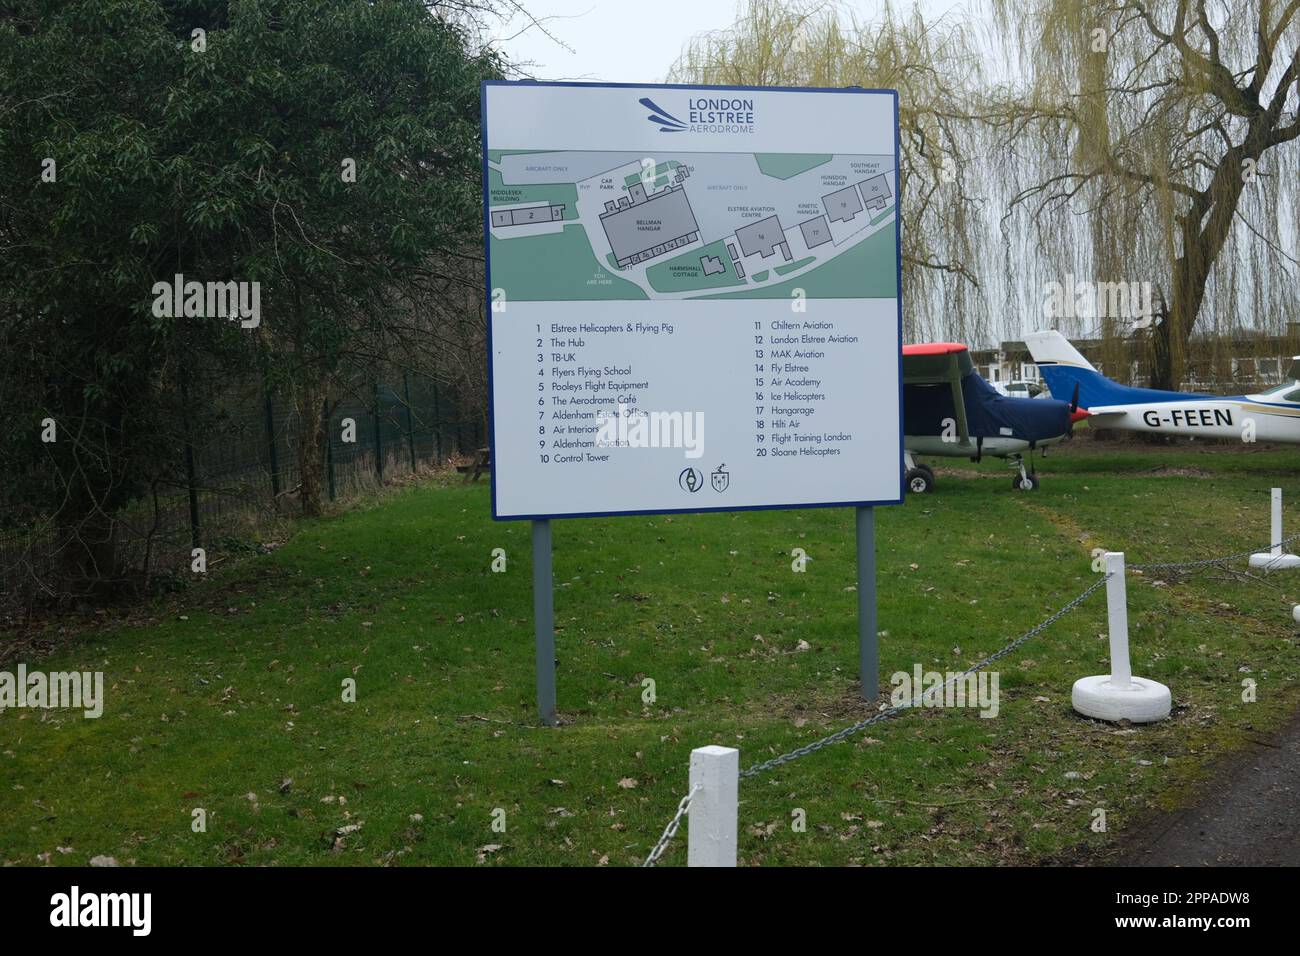 The entrance to Elstree aerodrome, Elstree, Hertfordshire. A helpful guide to your whereabouts greets visitors. Stock Photo